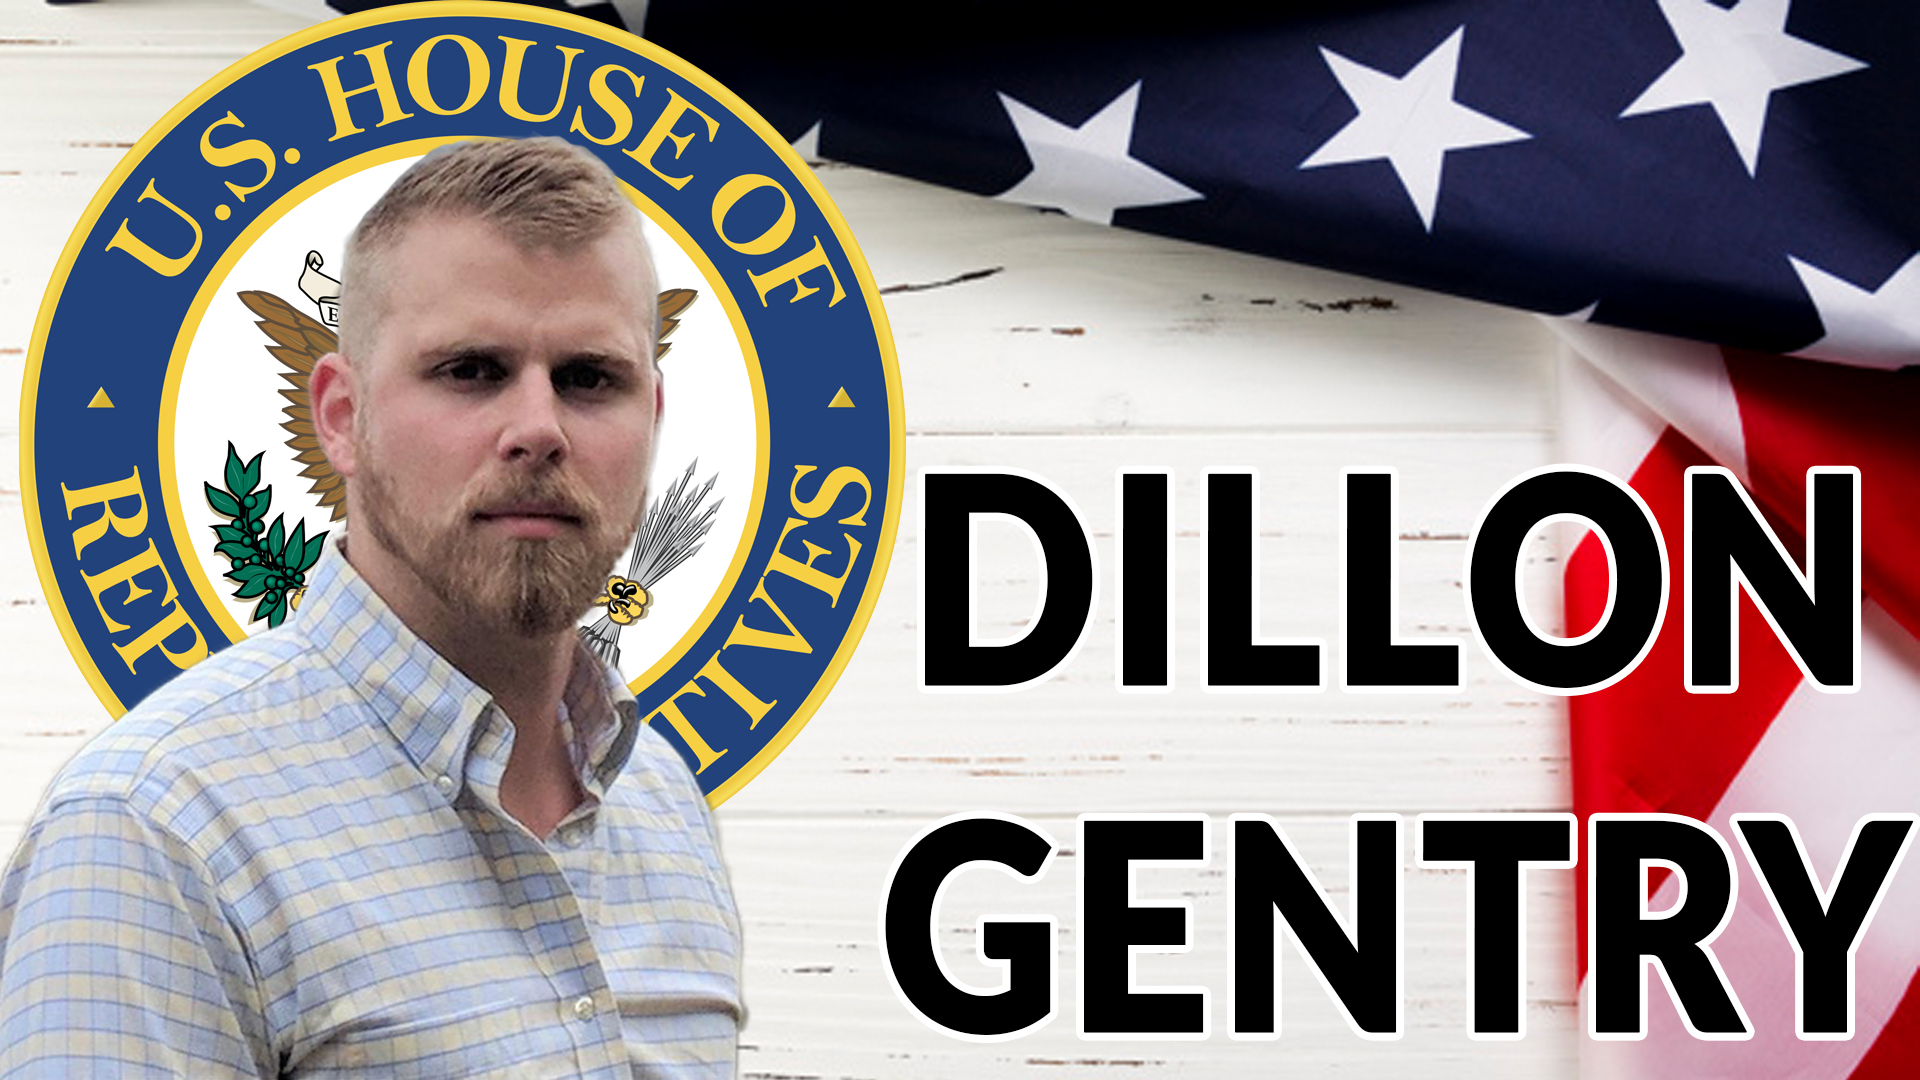 You are currently viewing Dillon Gentry, US House Candidate